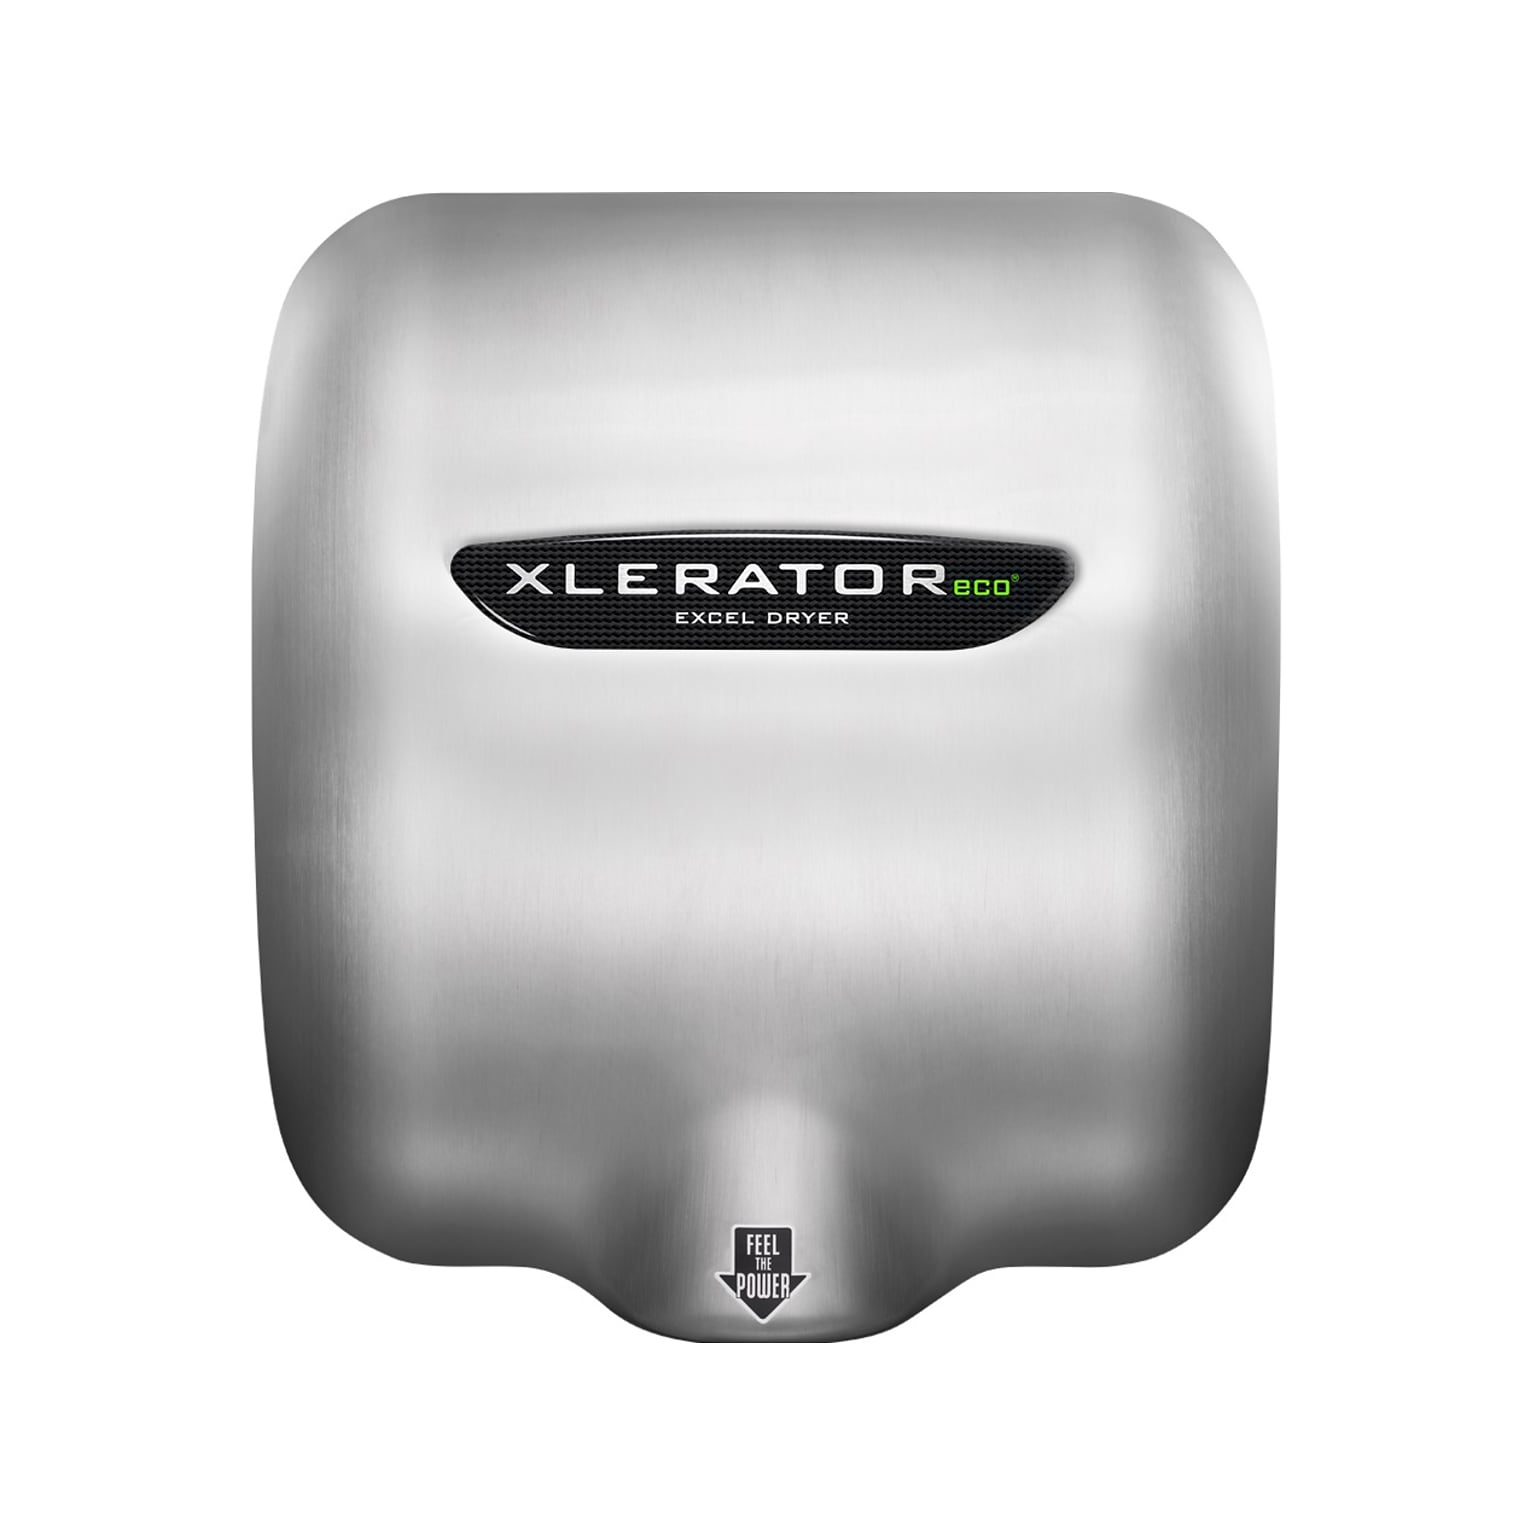 XLERATOReco 208-277V Automatic Hand Dryer, Brushed Stainless Steel (704166)